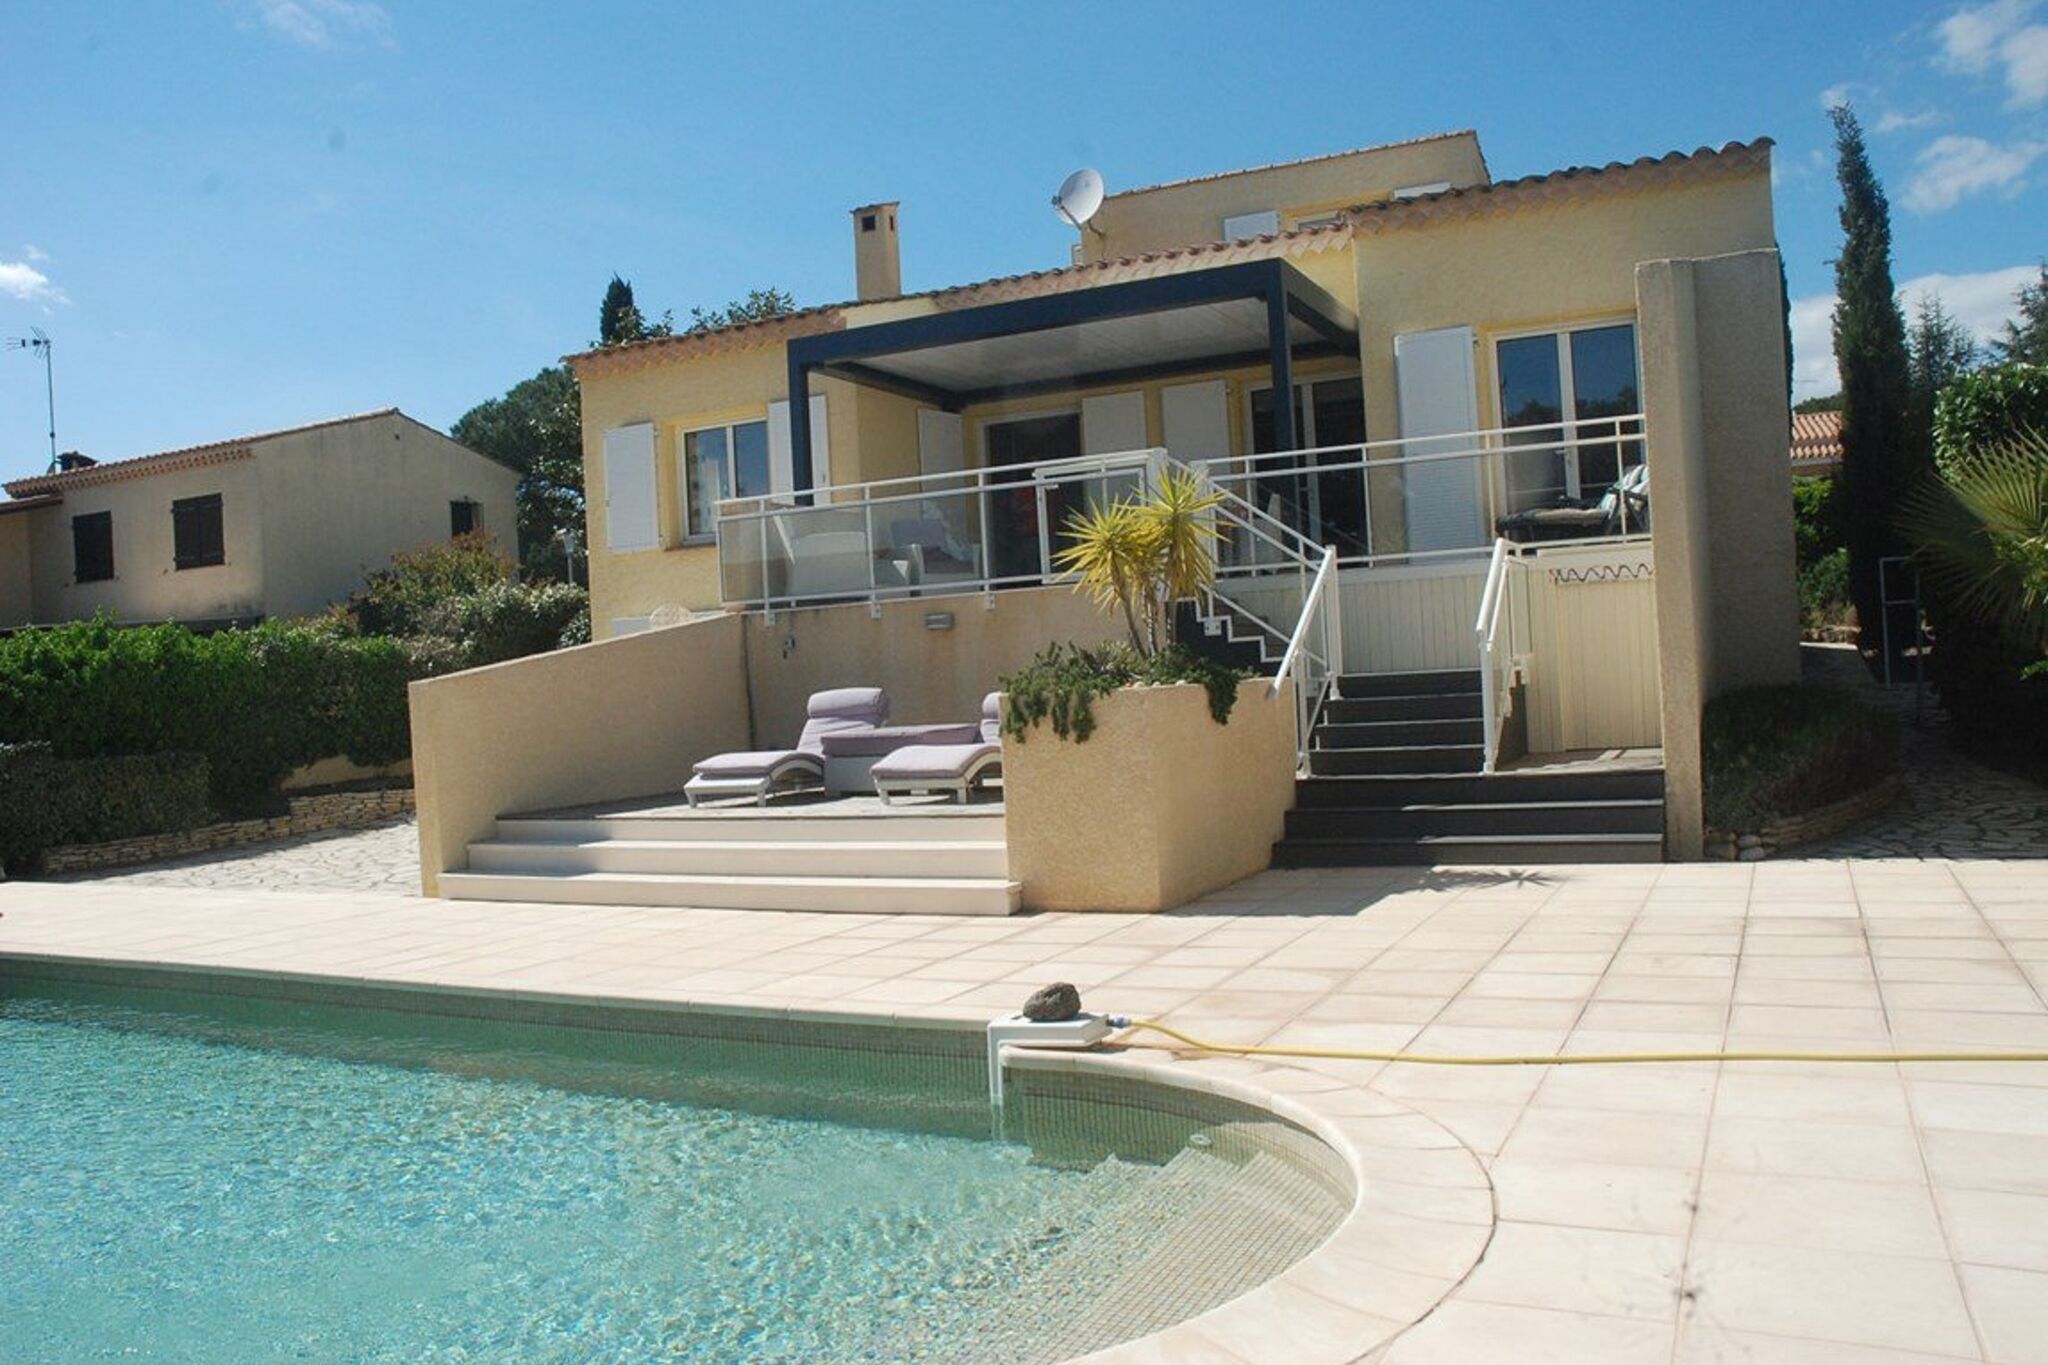 Amazing holiday home in Agde with private pool